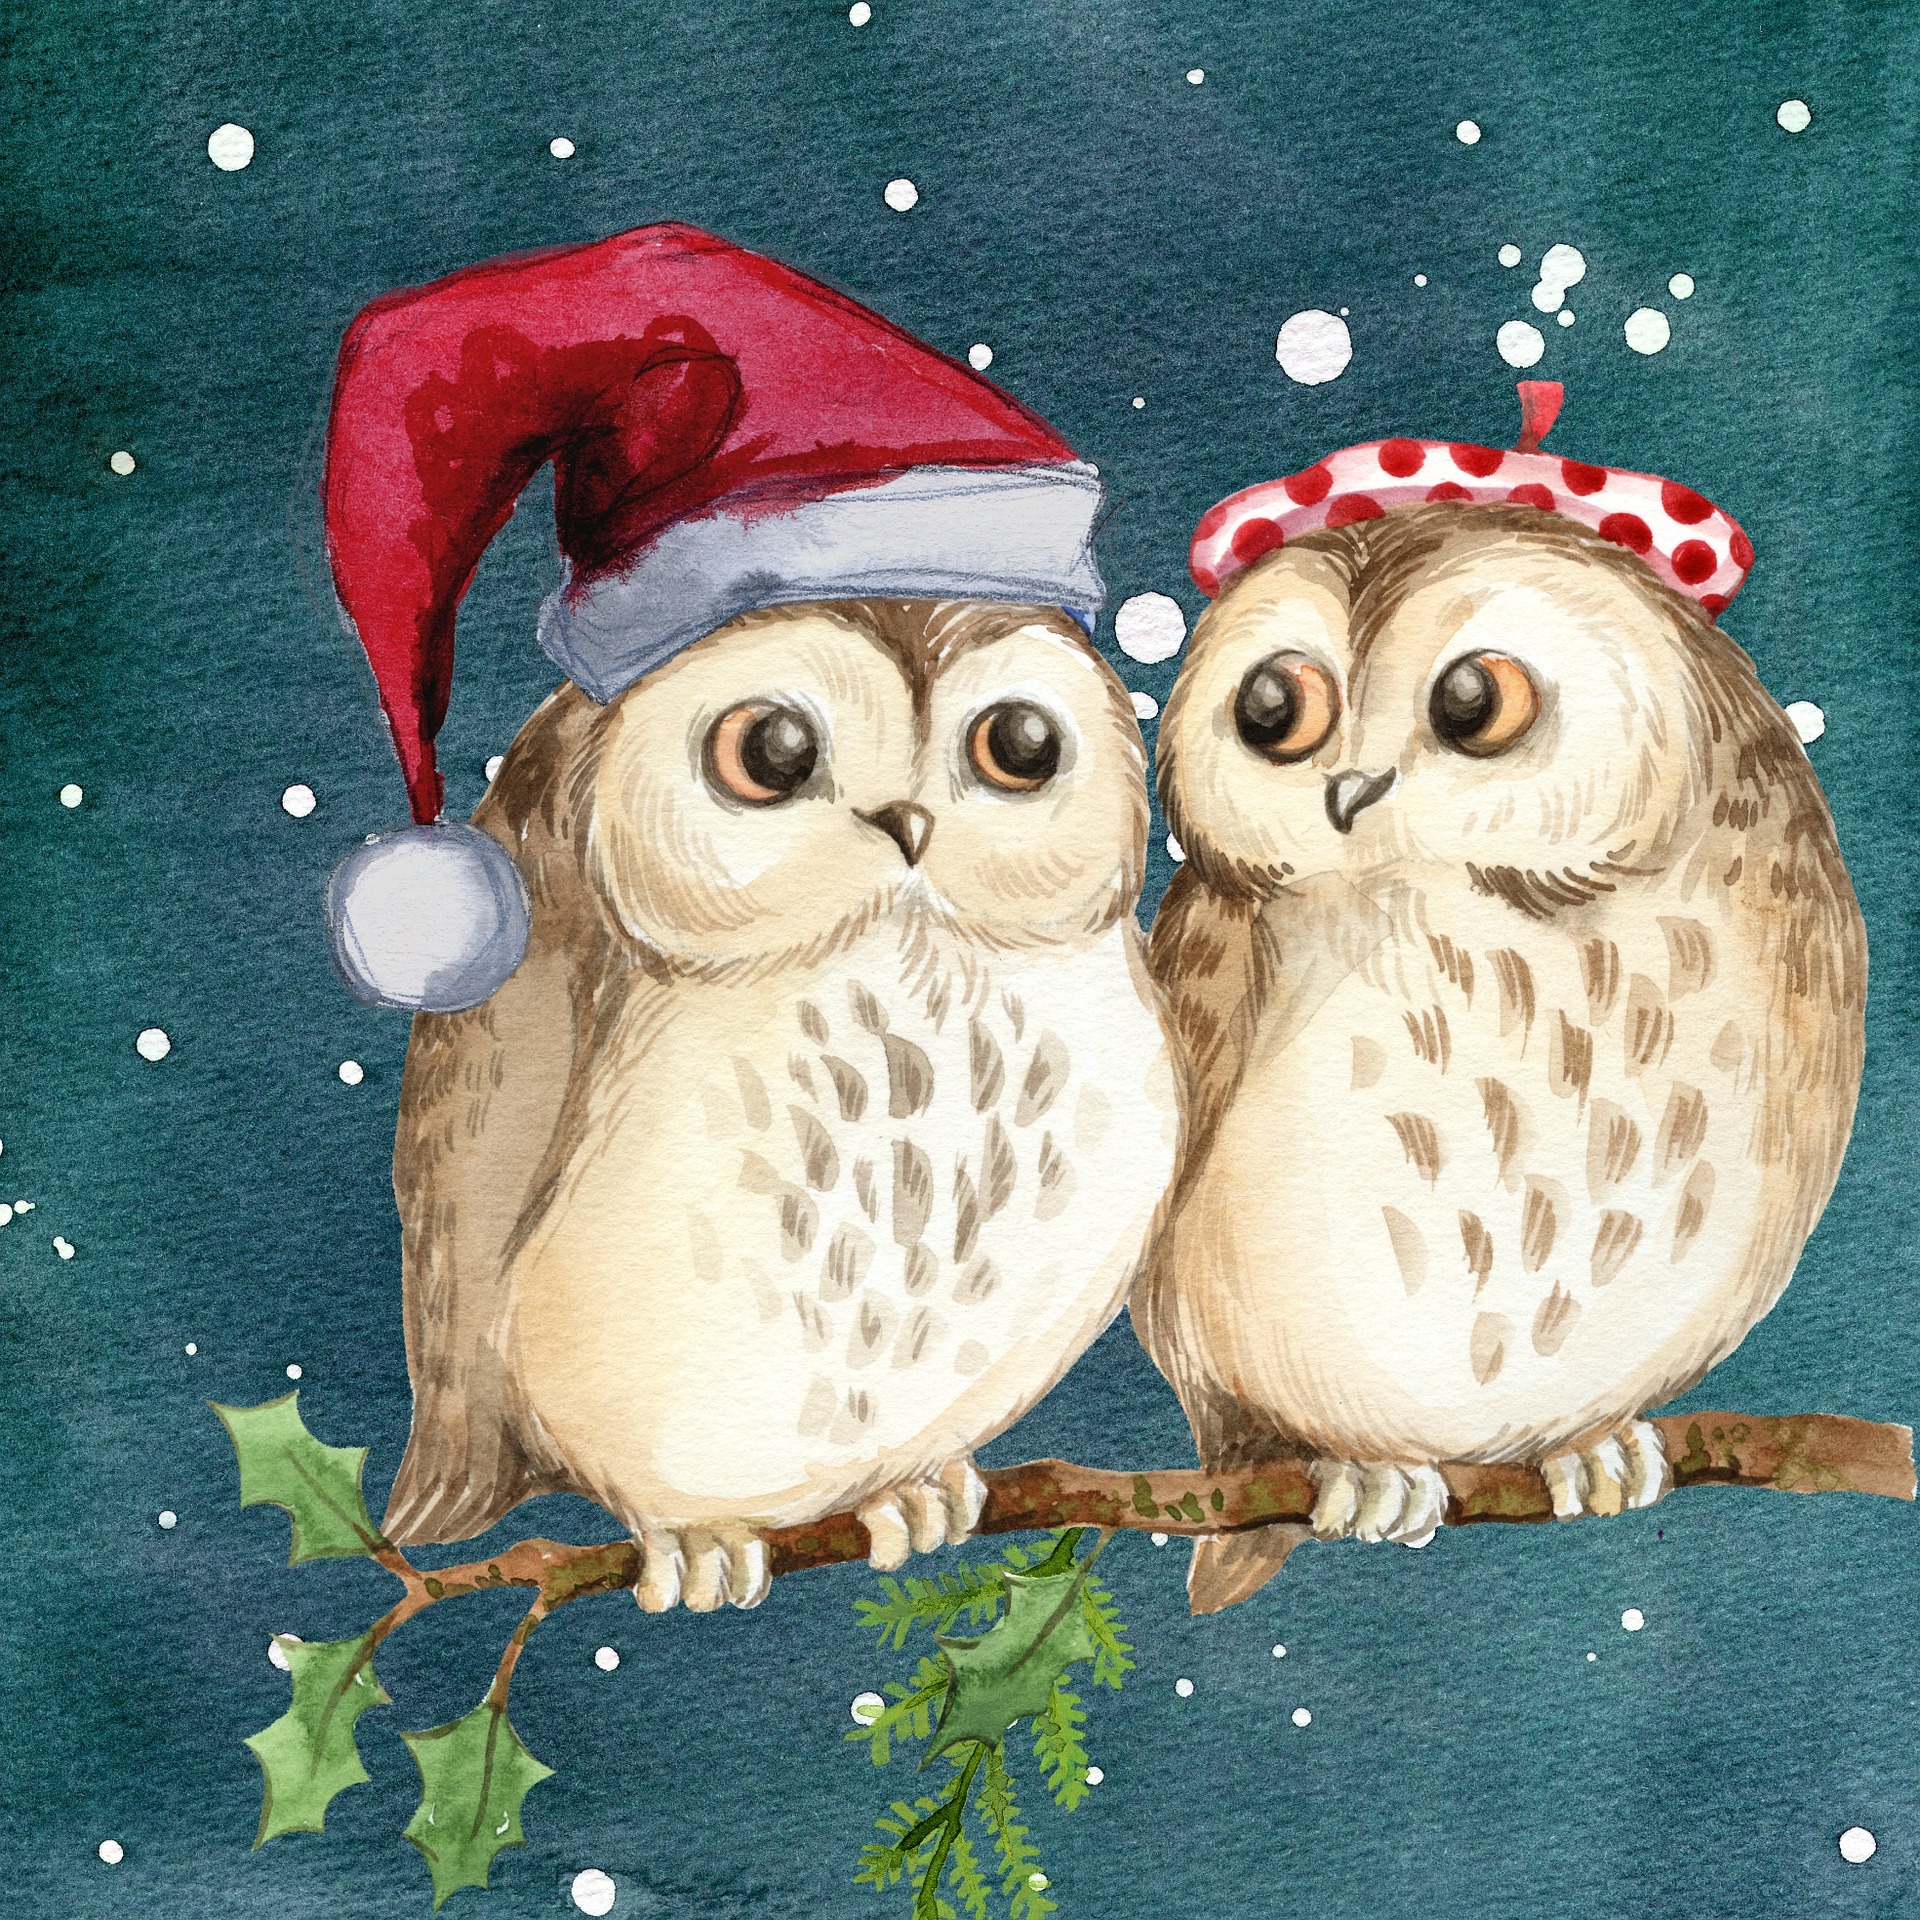 Two cute owls in Christmas attire